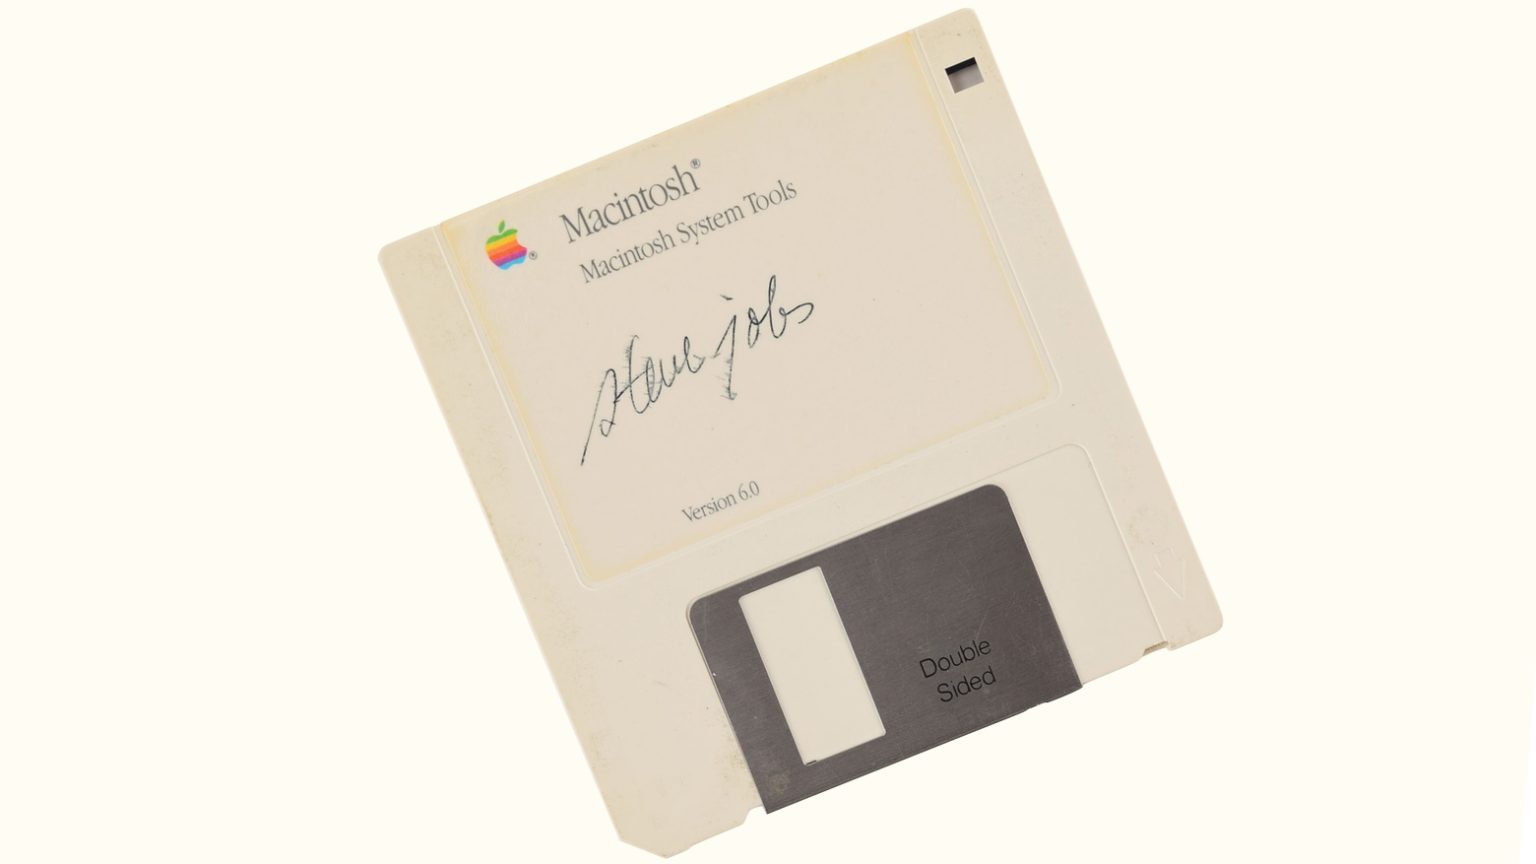 This 3.5-inch Macintosh floppy disk signed by Steve Jobs is up for auction.